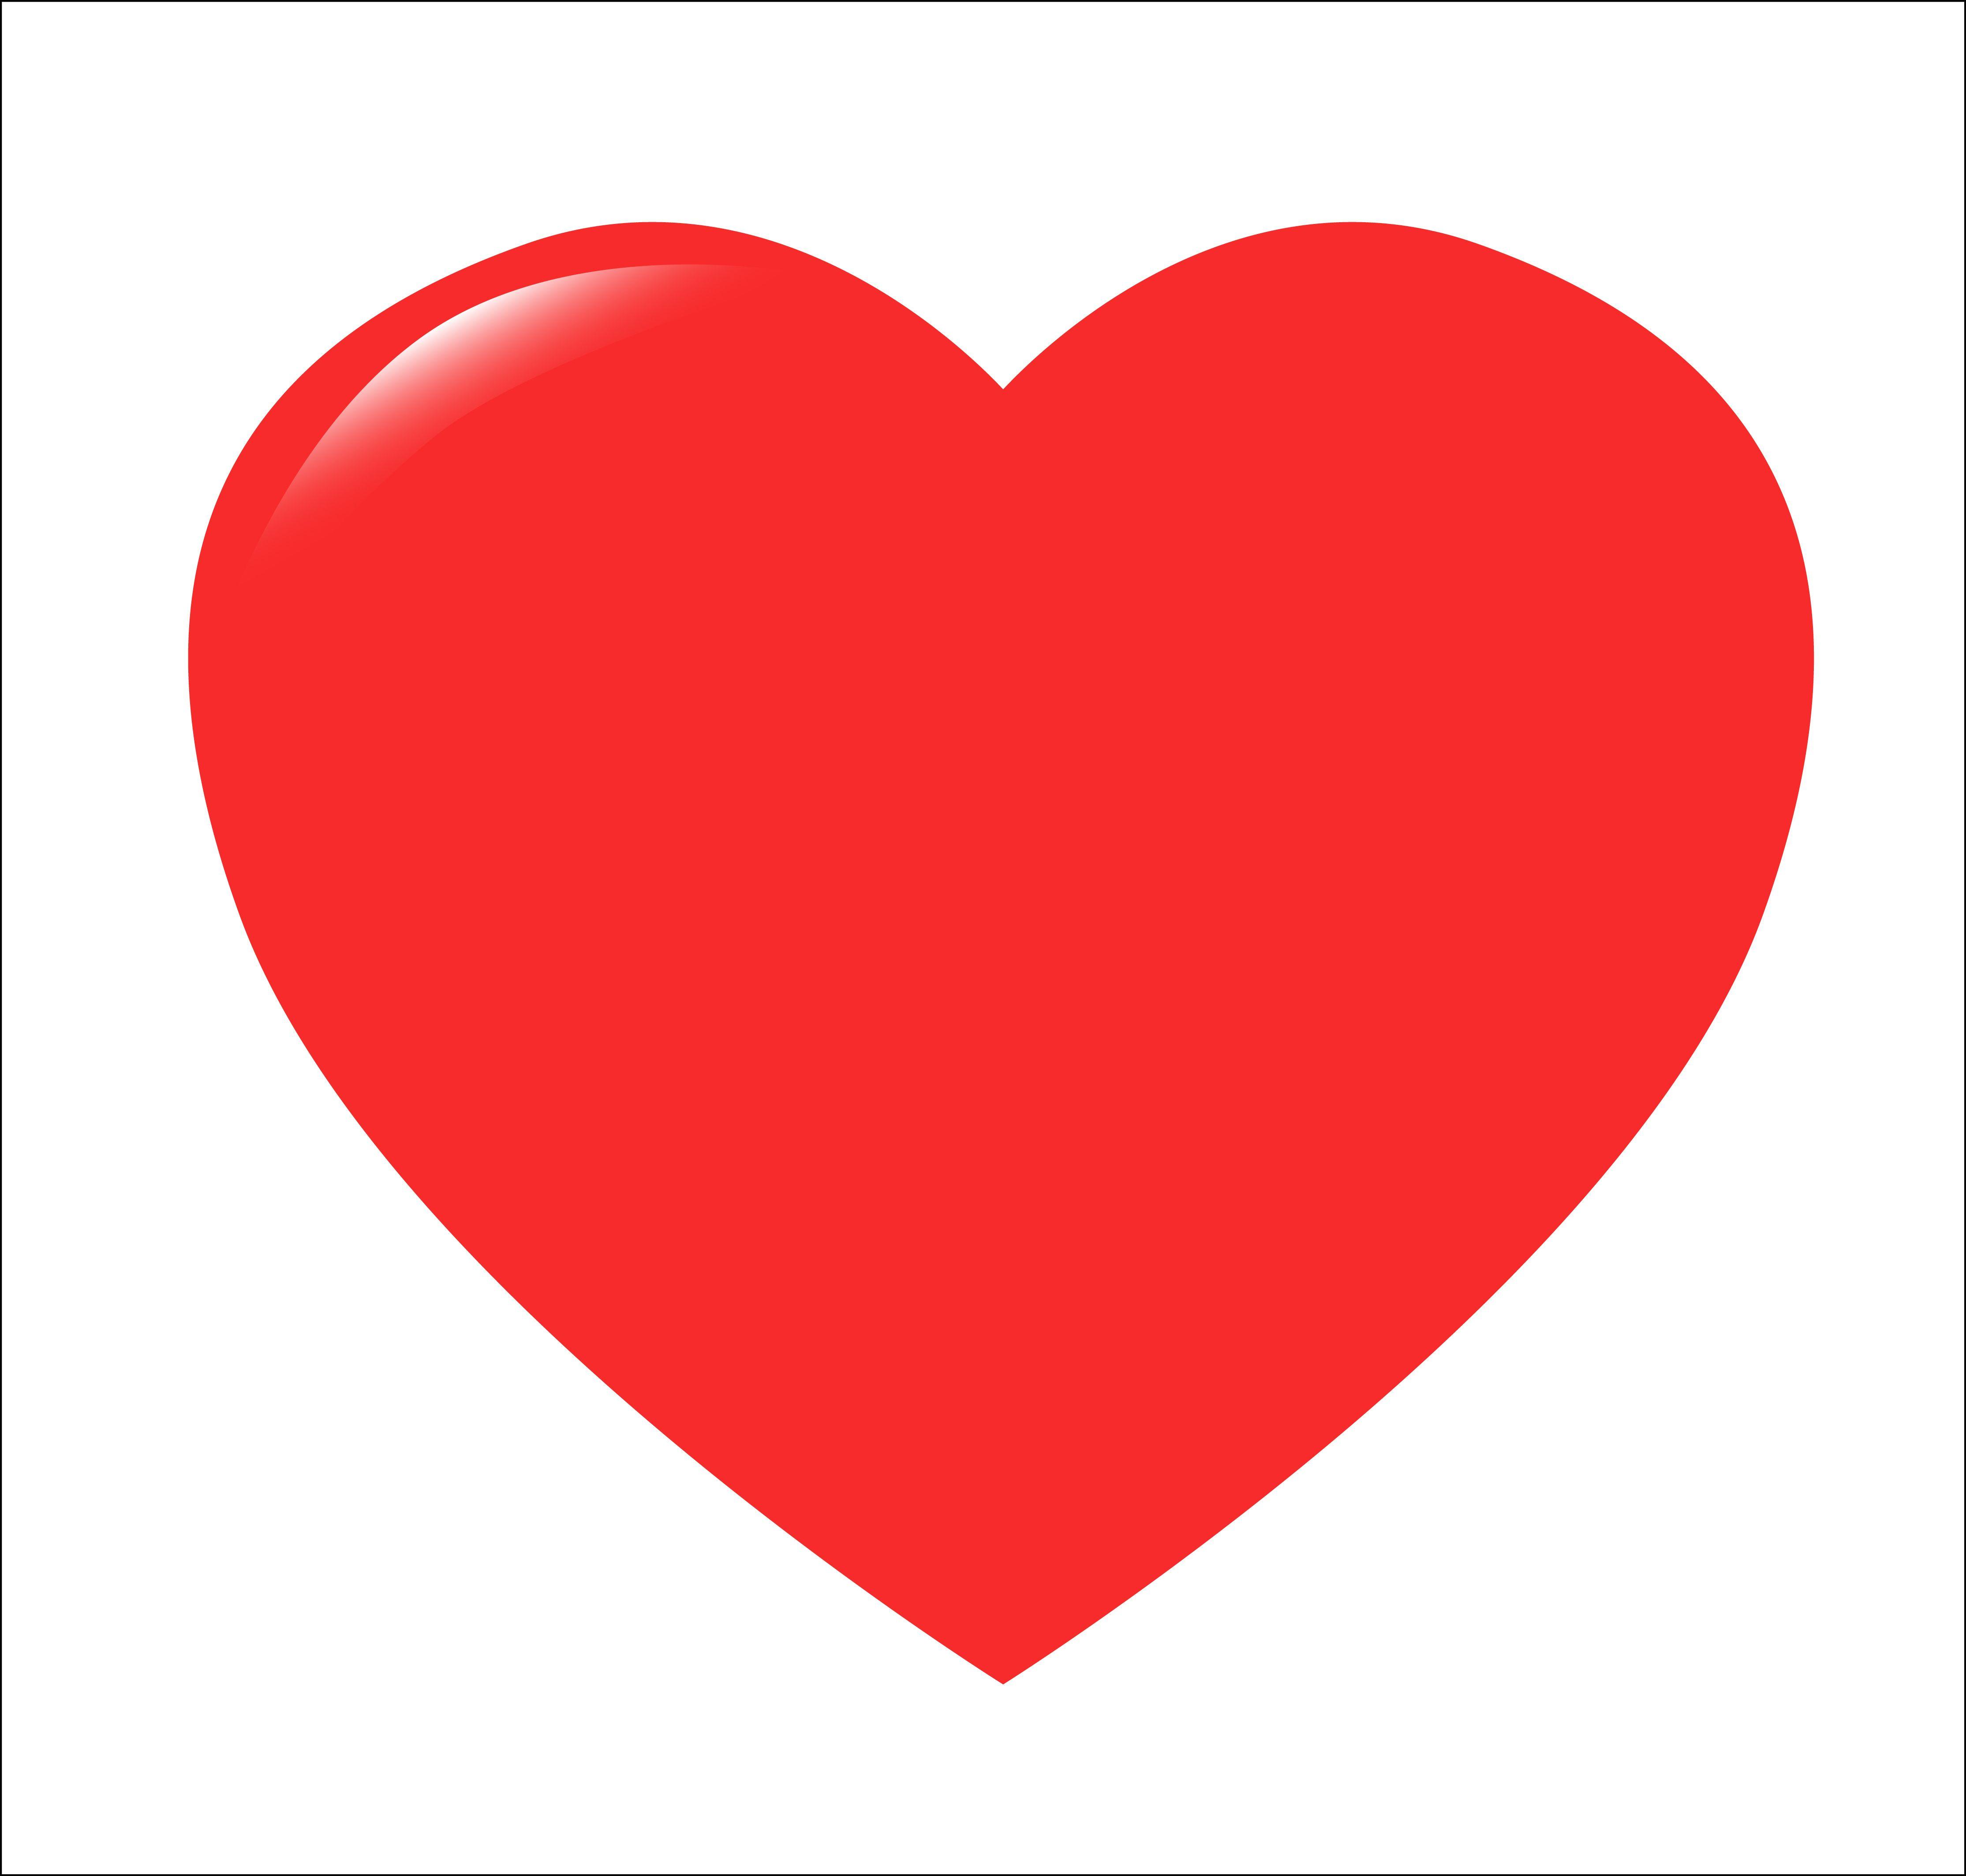 Red Heart Logo - Free Red Heart Pictures, Download Free Clip Art, Free Clip Art on ...